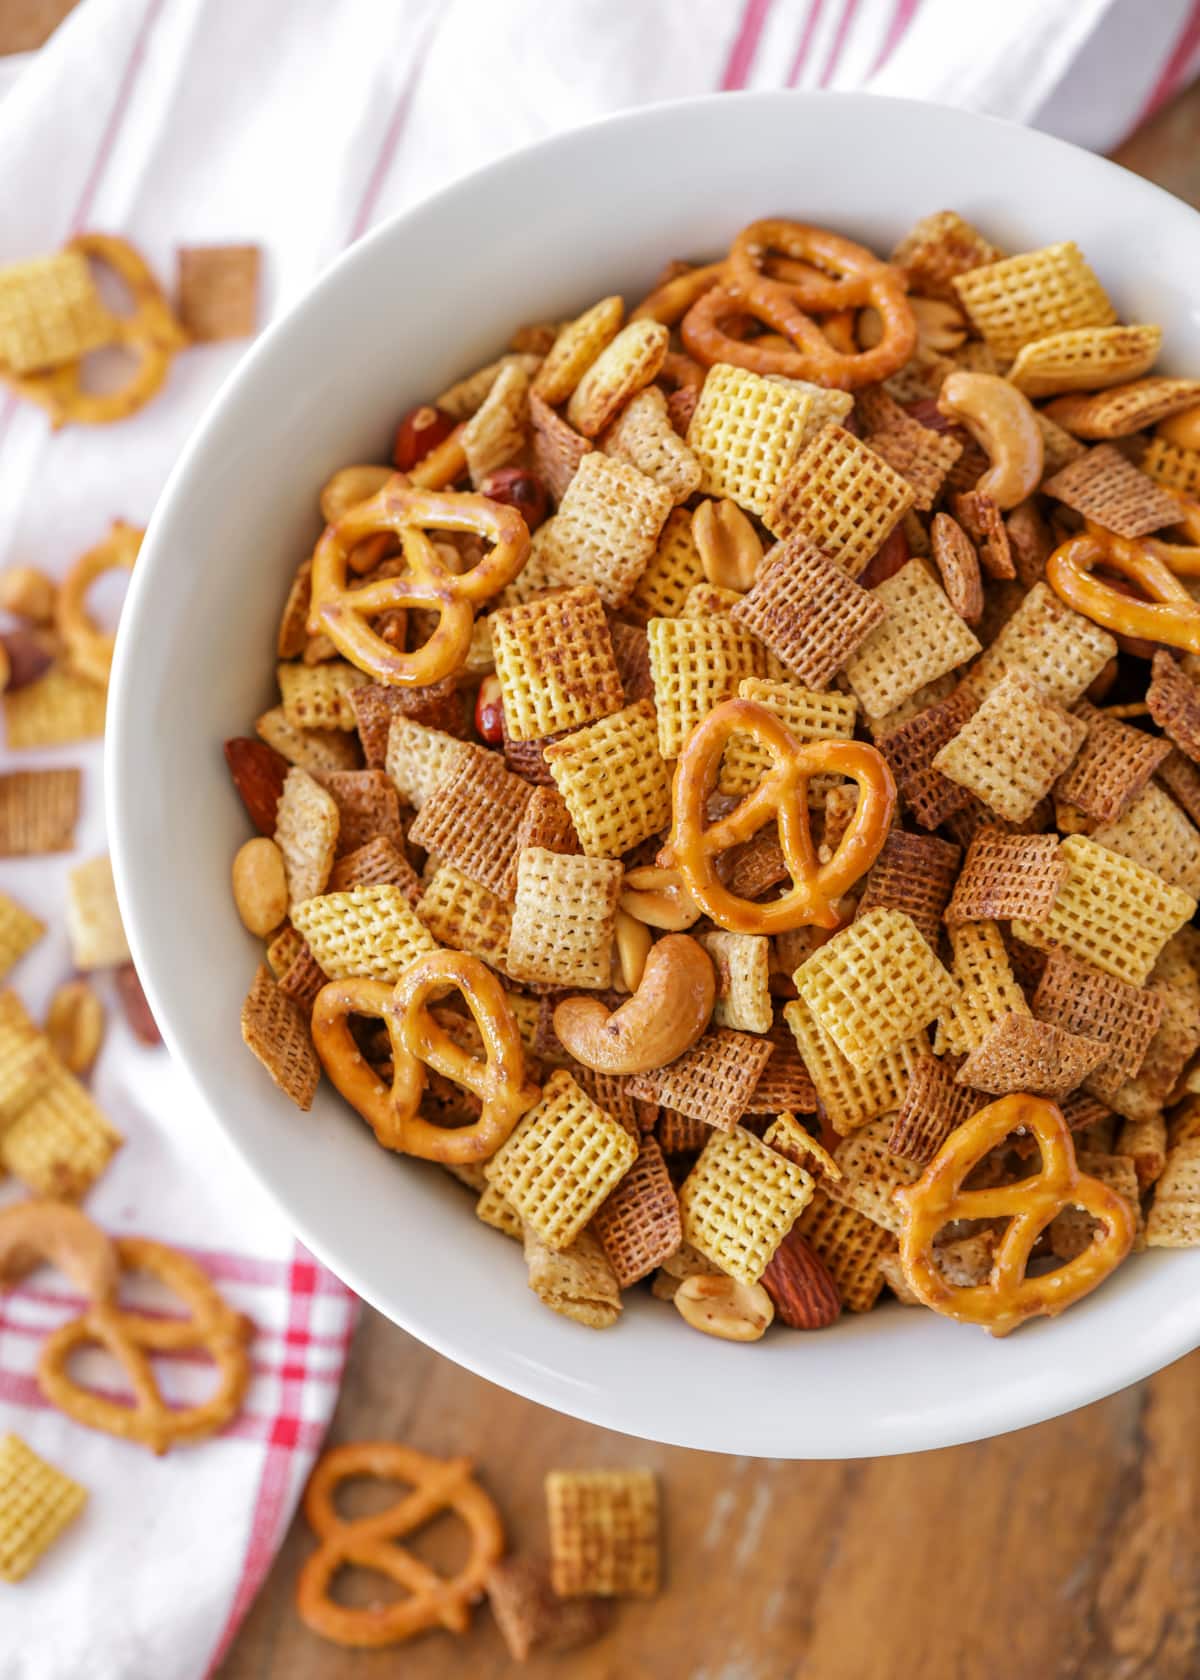 Toasted chex mix served in a white bowl.